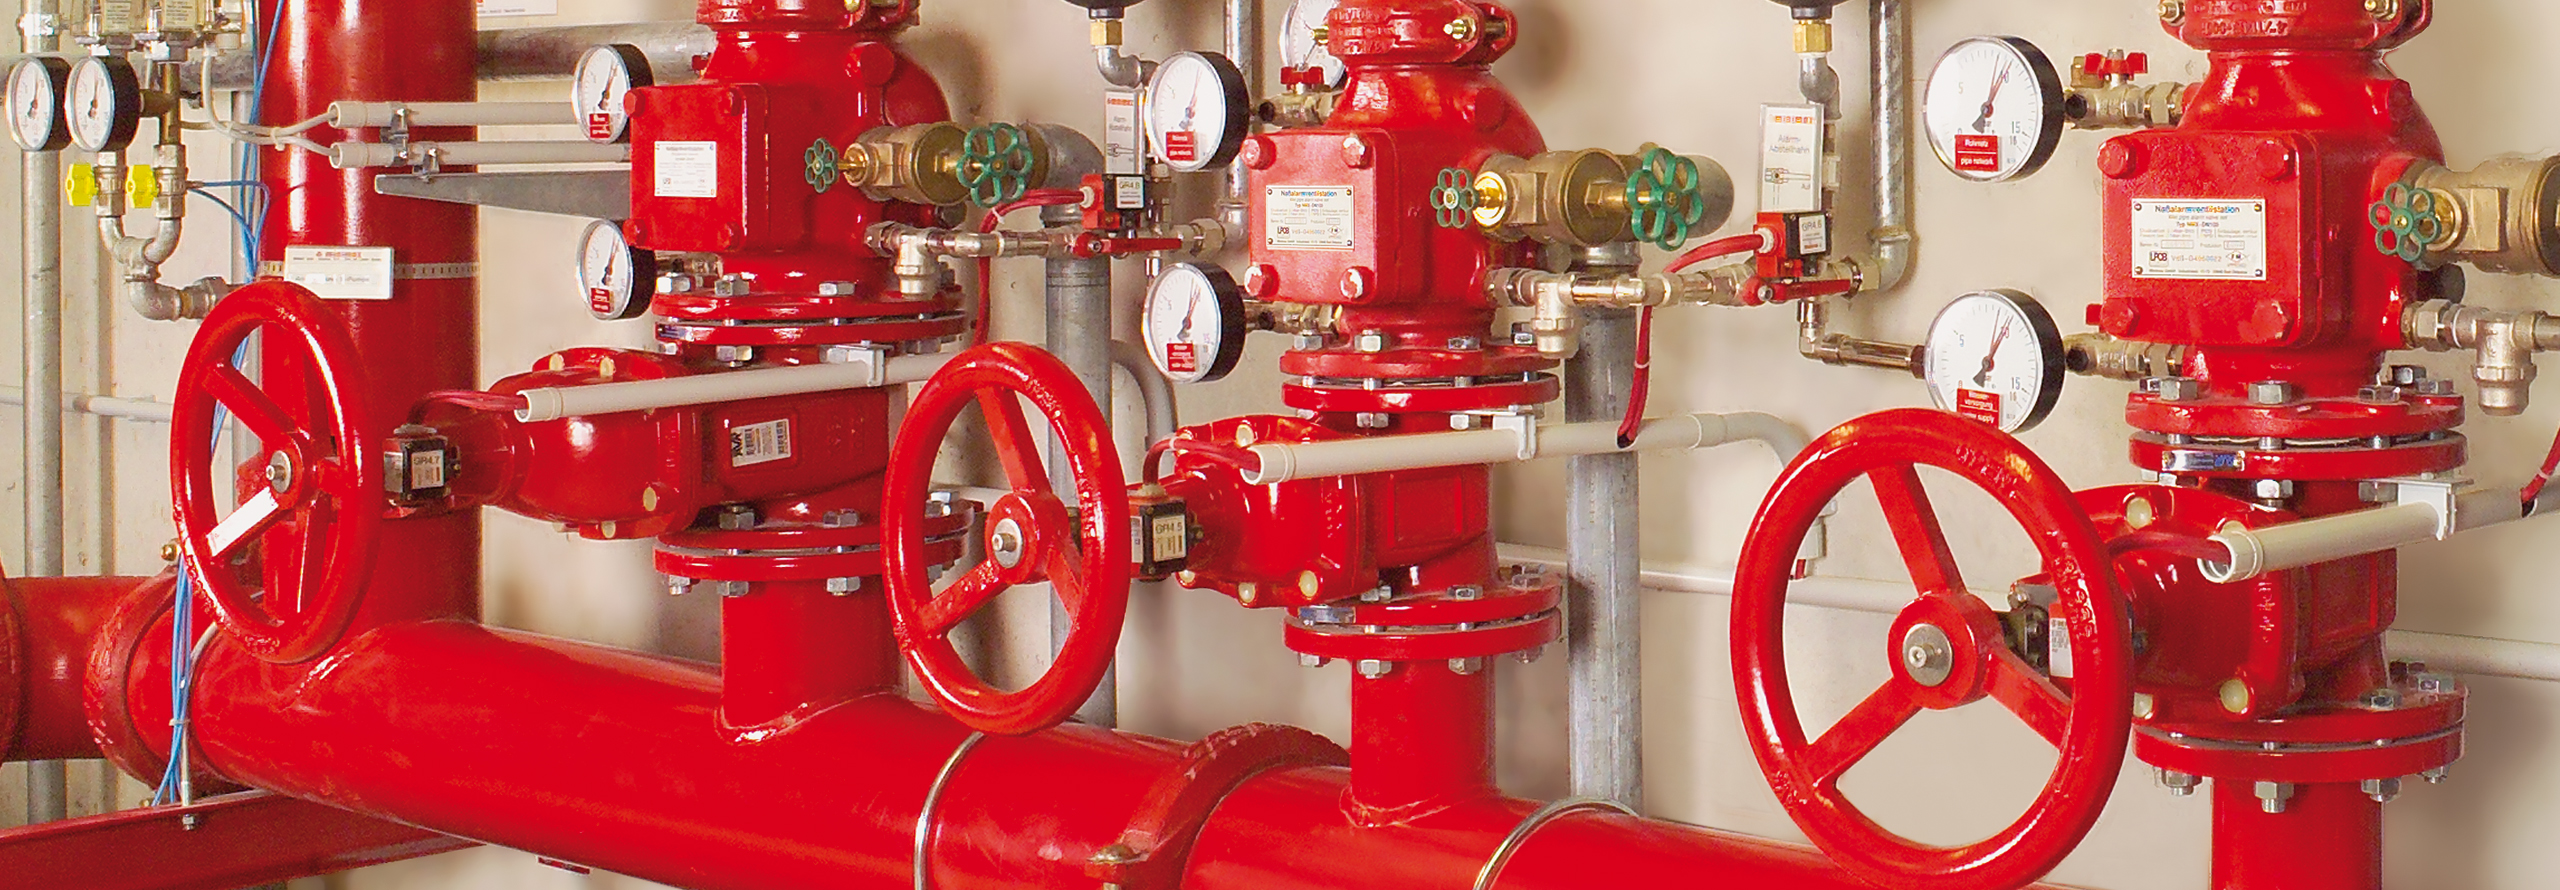 Deluge systems use deluge valves to quickly deliver large volumes of water to extinguish a fire.